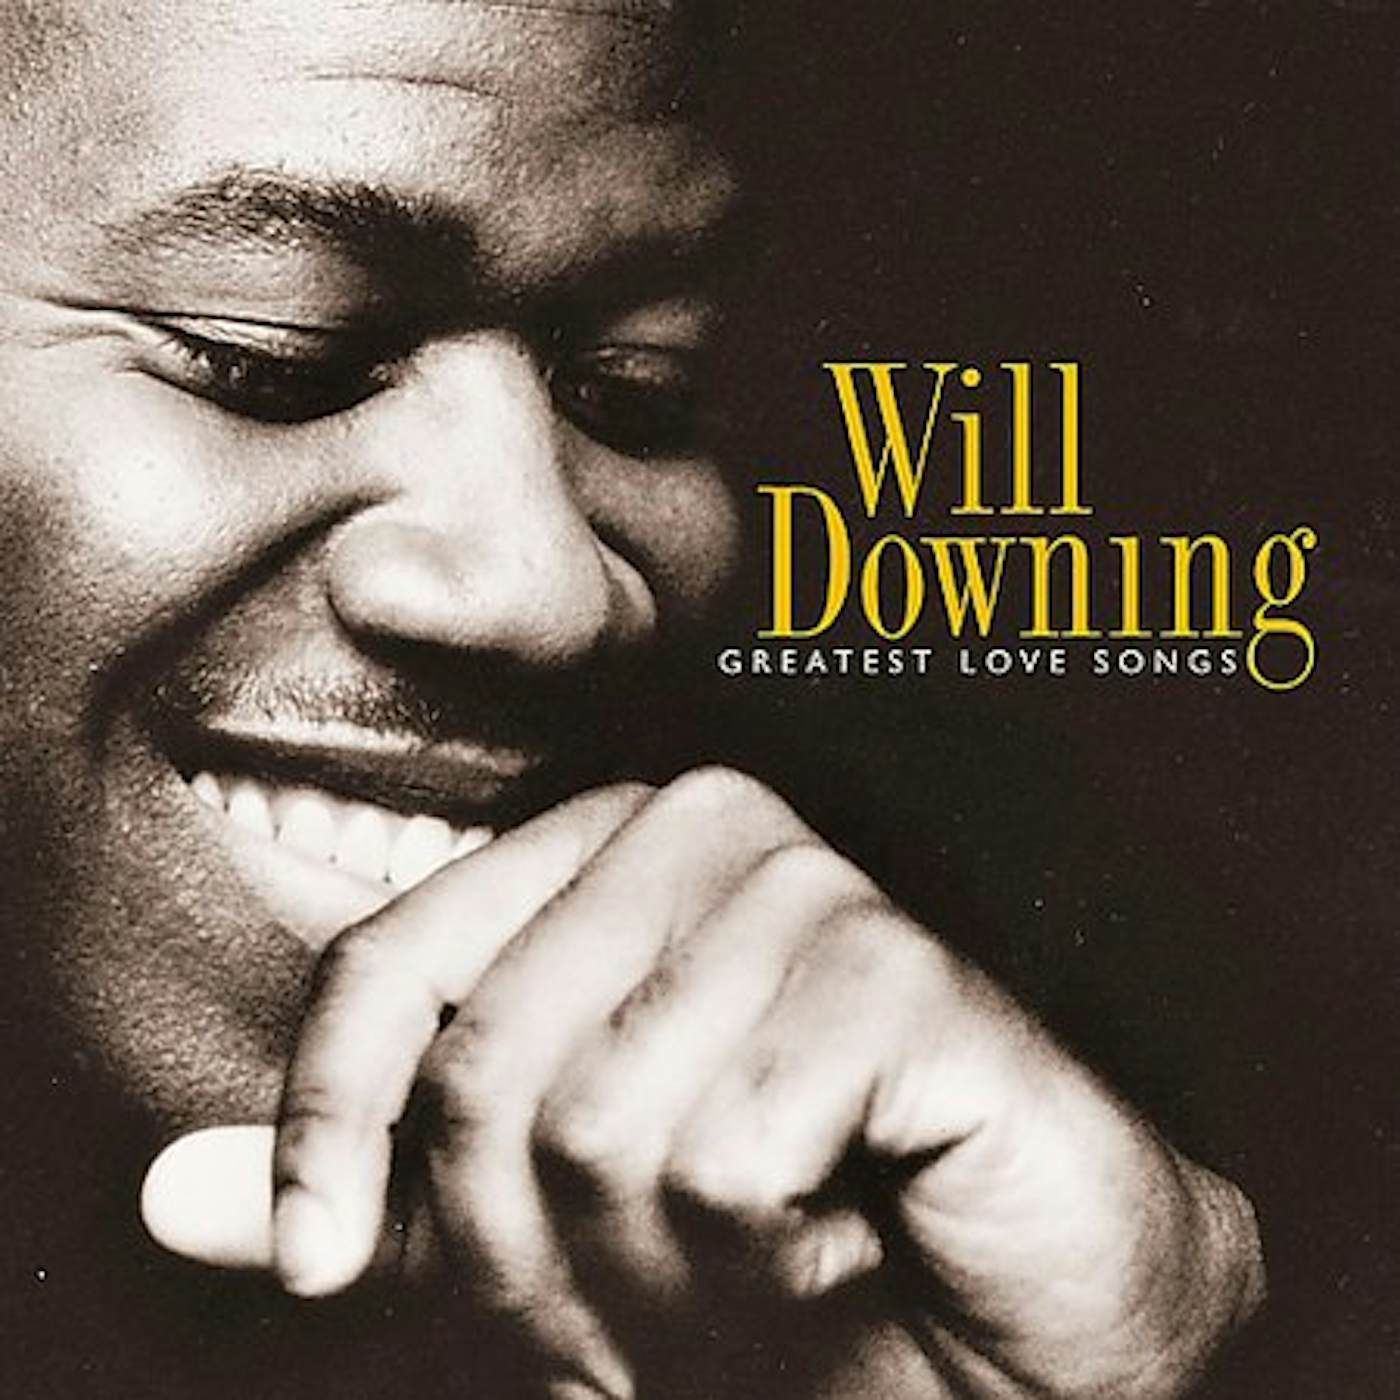 Will Downing GREATEST LOVE SONGS CD